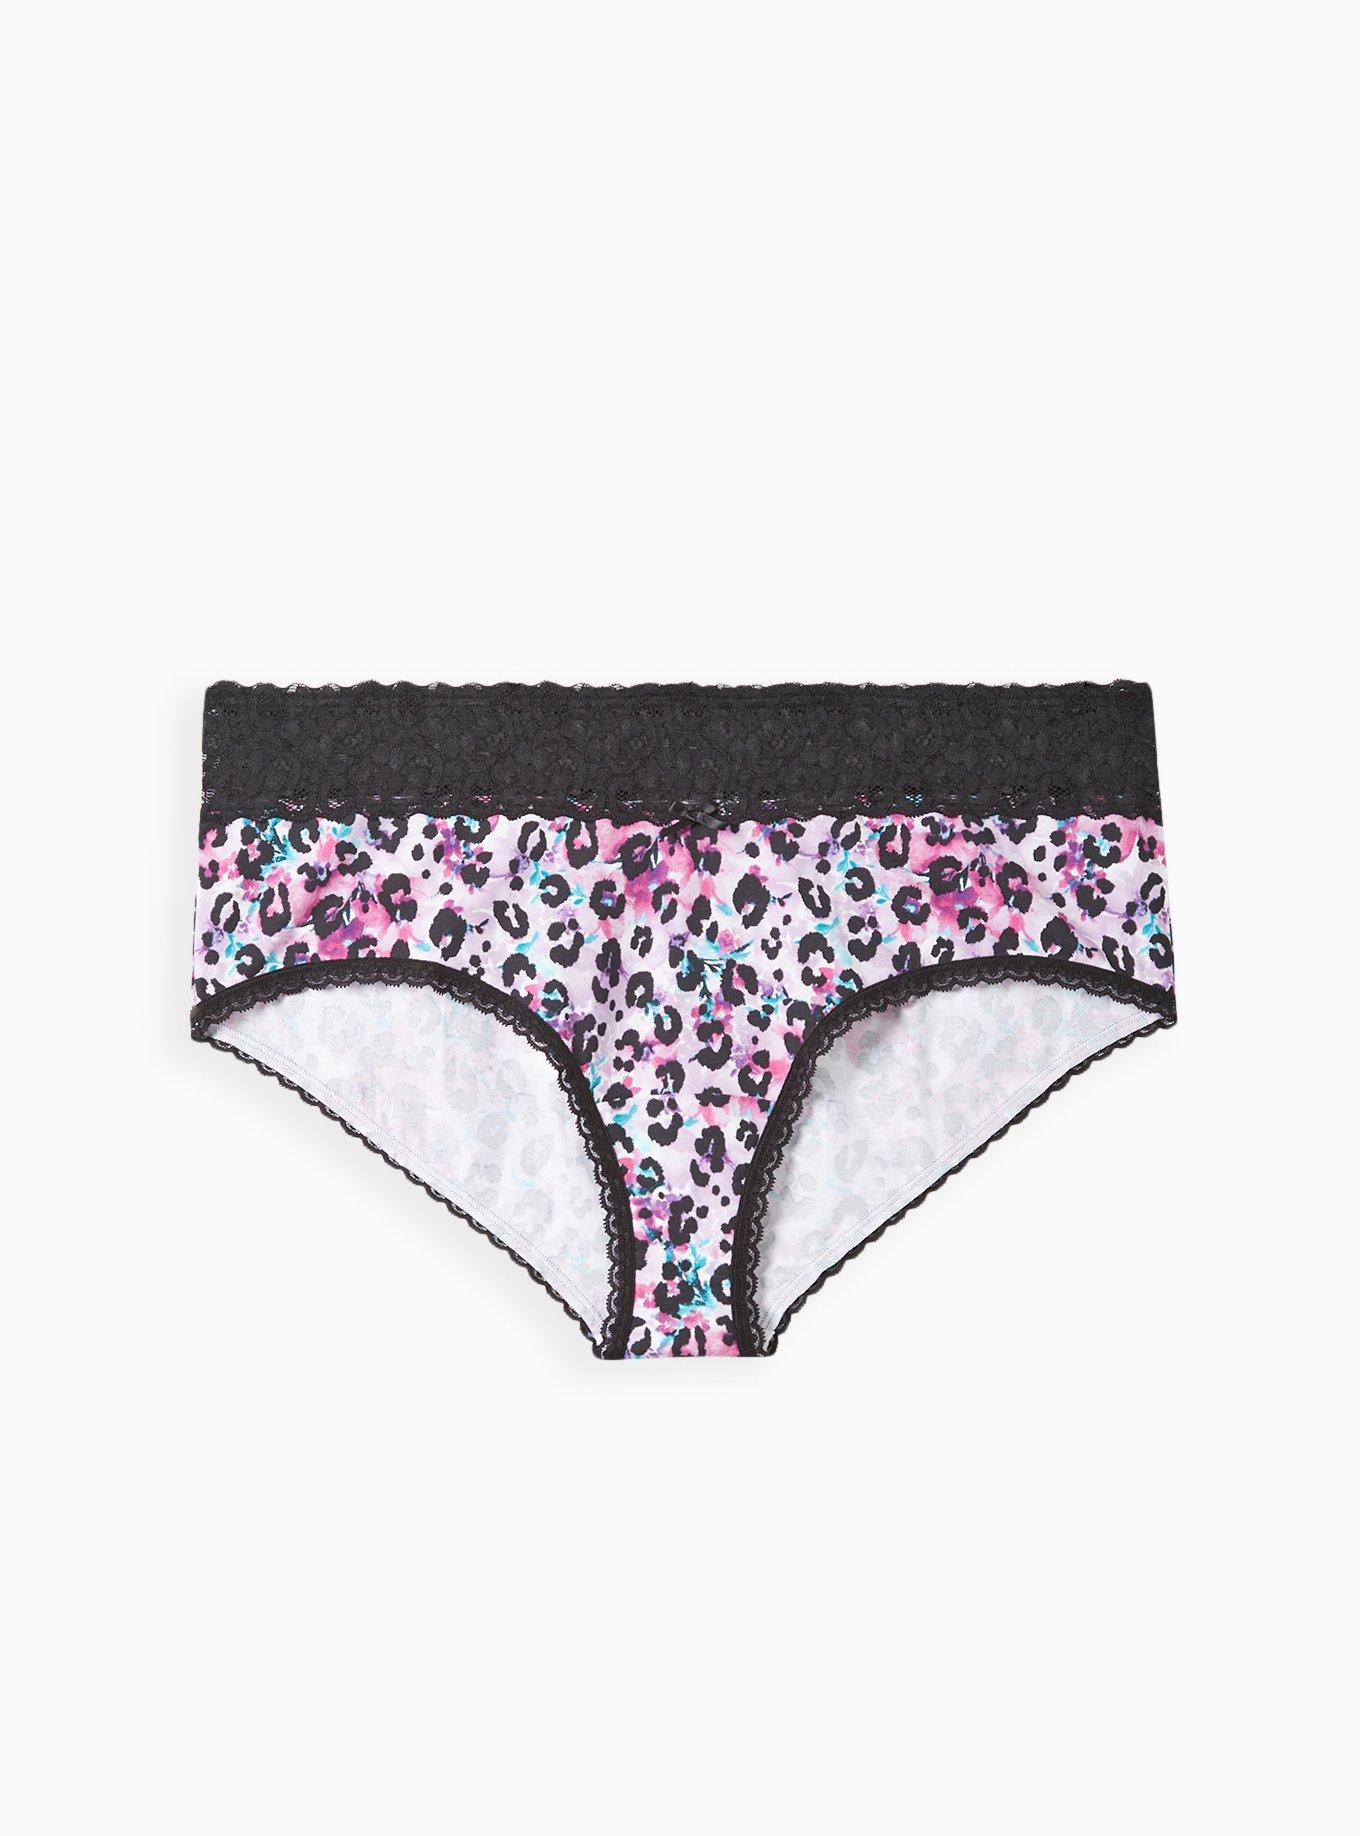 What happened to the colorful printed panties PINK used to have?? They are  so plain now : r/VictoriasSecret